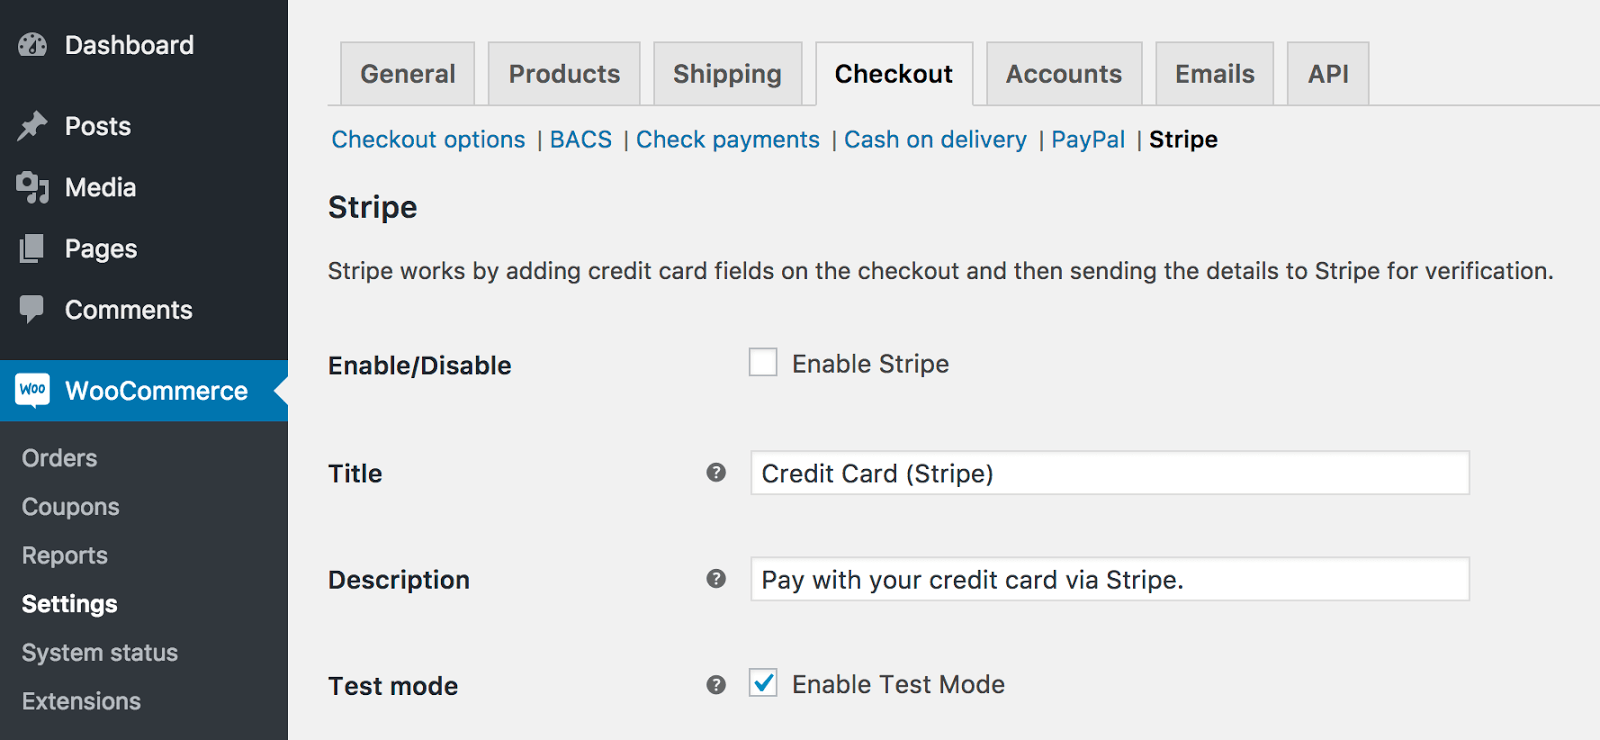 How to connect Stripe to WordPress